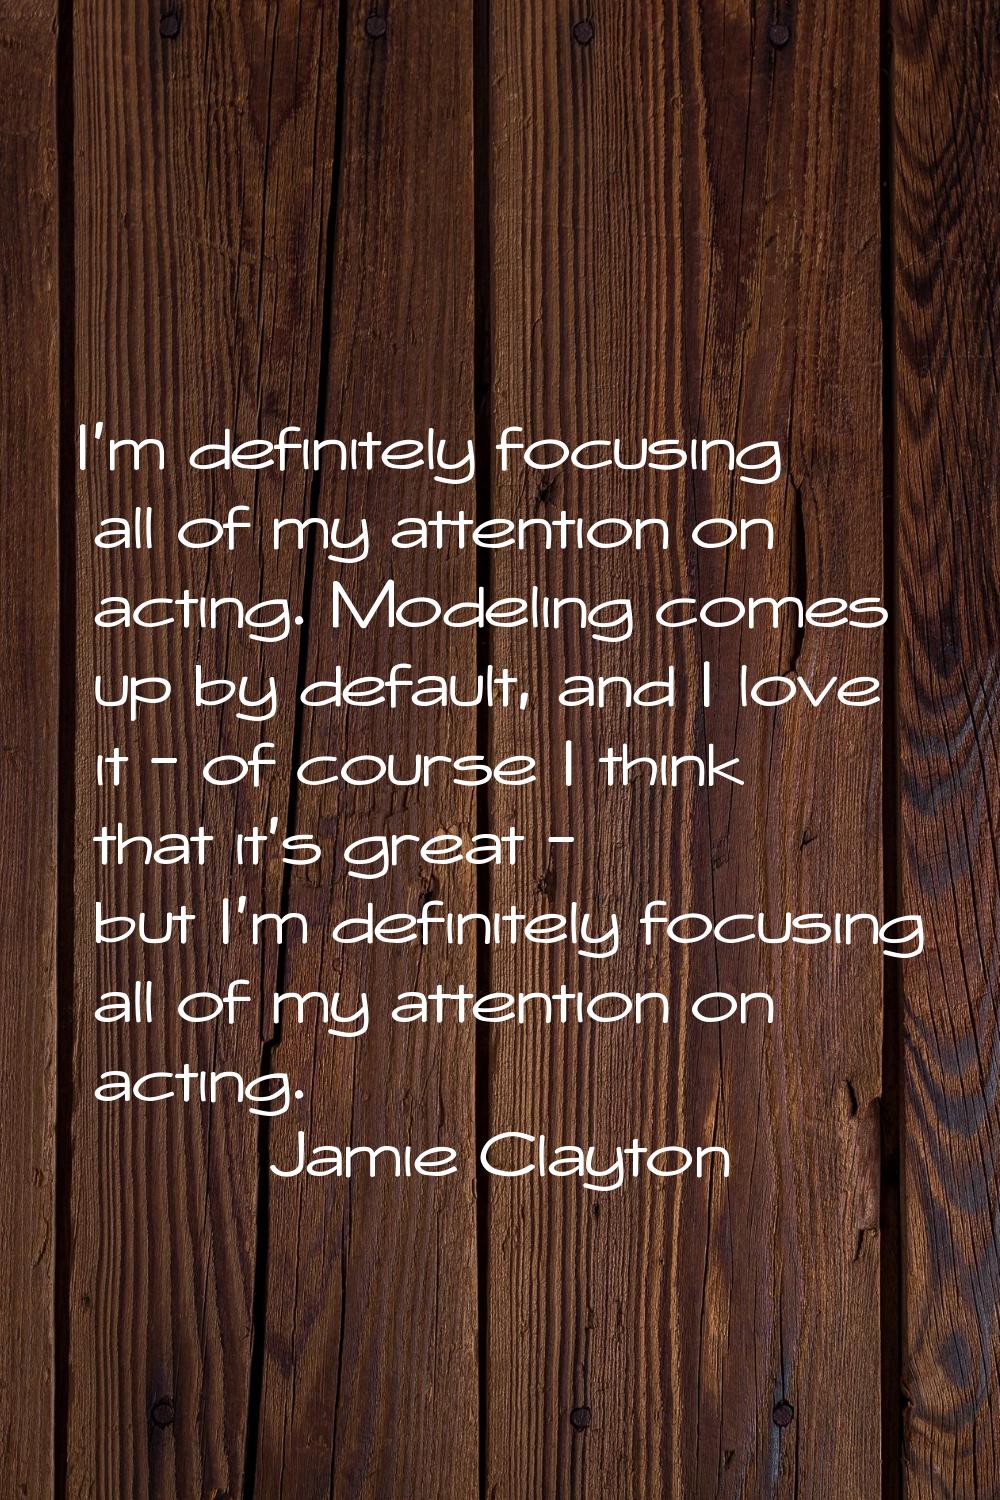 I'm definitely focusing all of my attention on acting. Modeling comes up by default, and I love it 